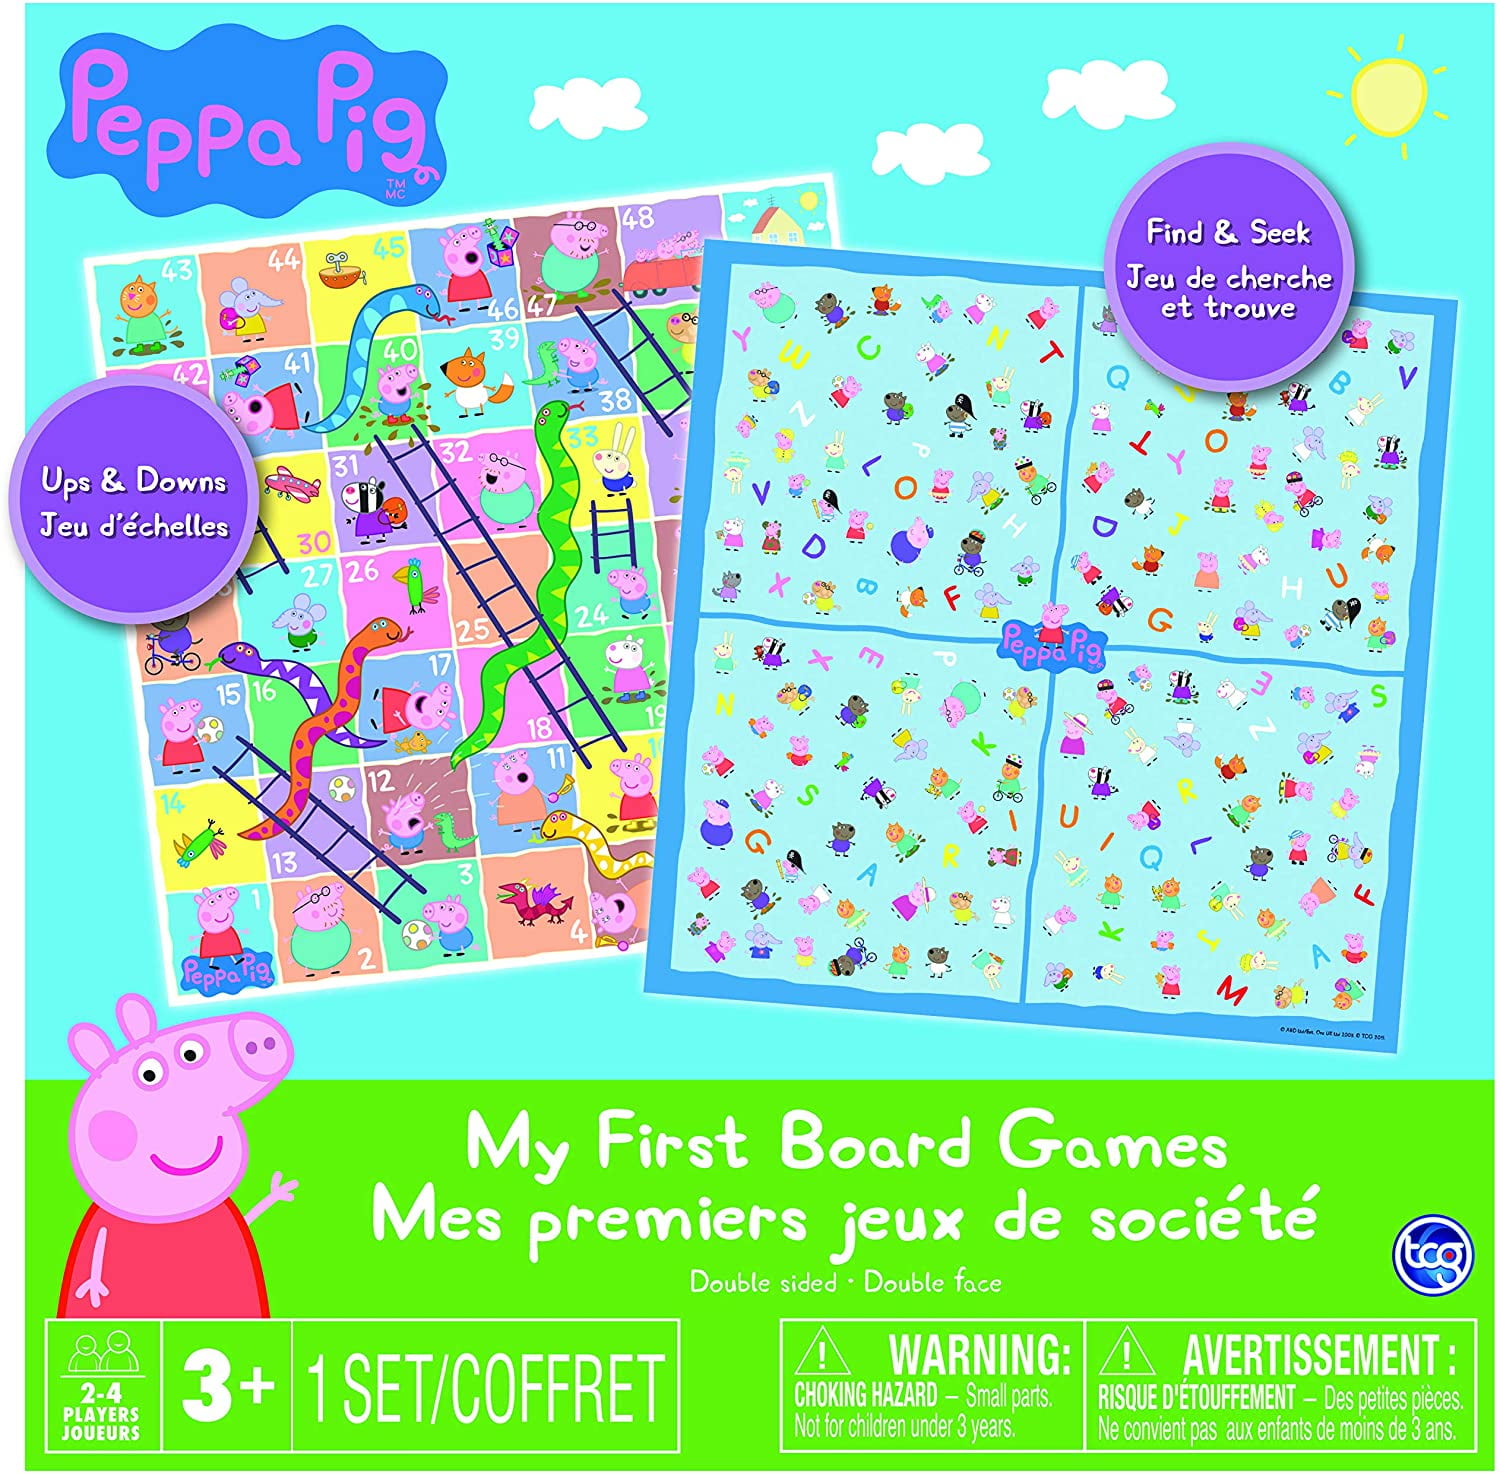 Details about   Peppa Pig Action Youth Board Game 